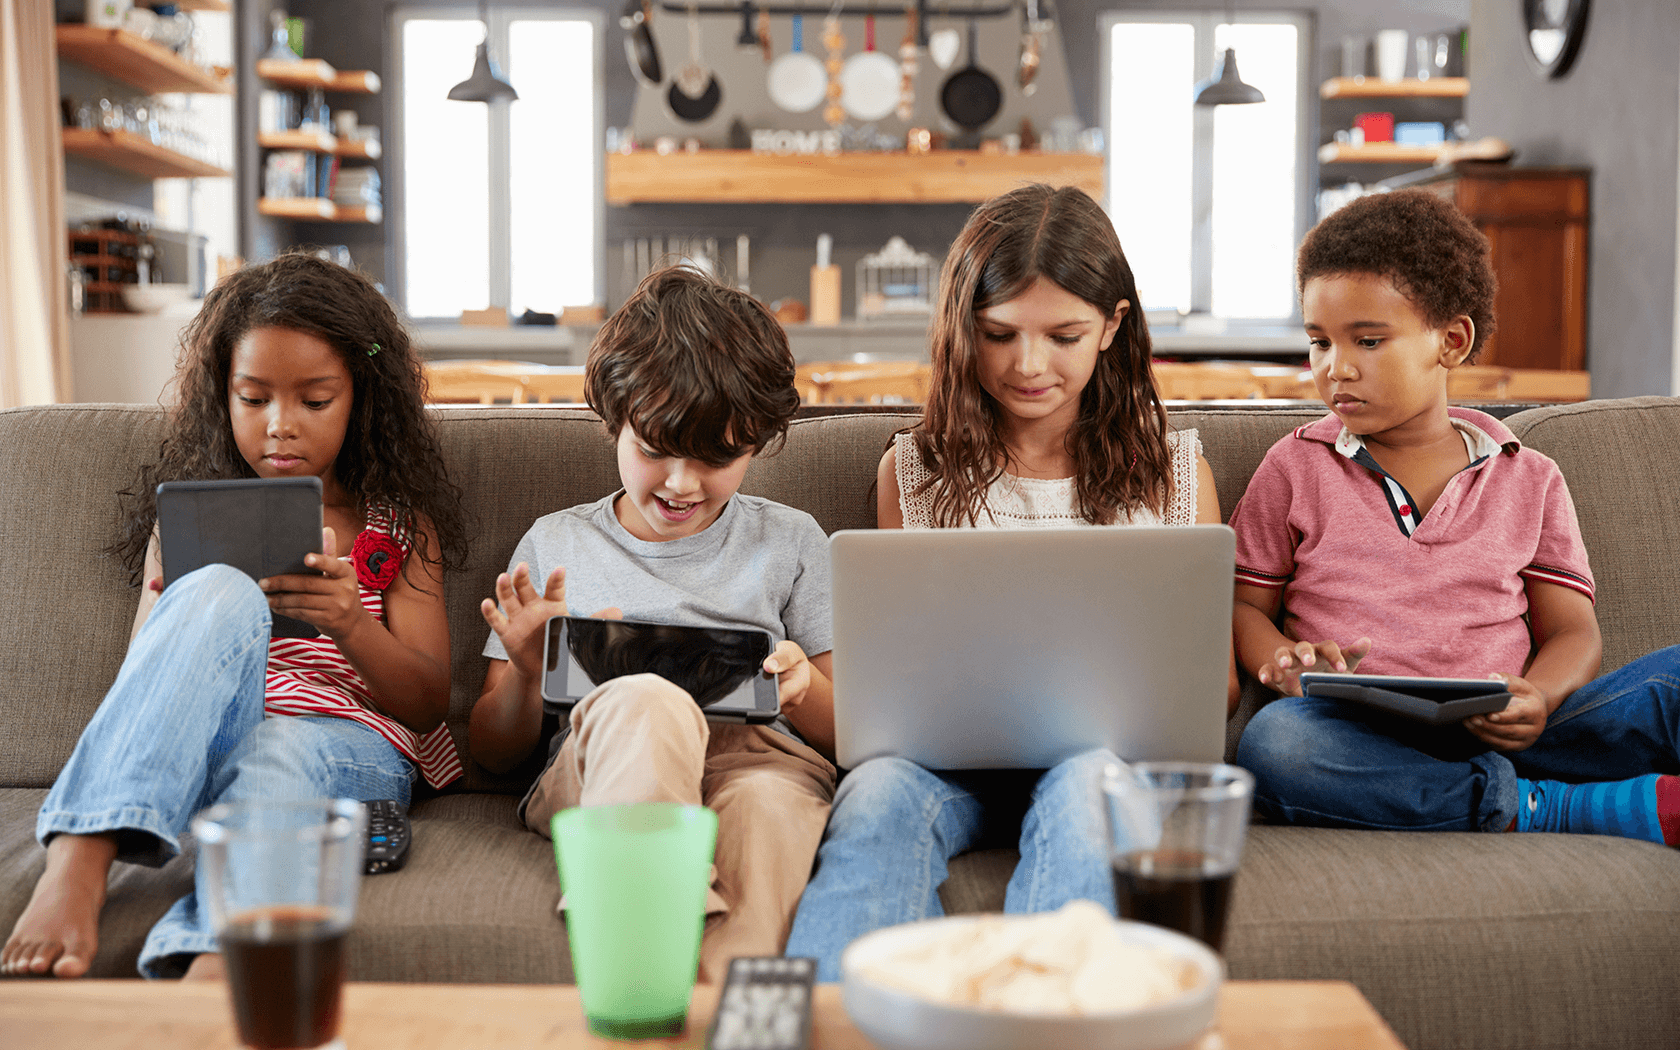 Screen Time Guidelines vs. Reality: How Much Time Are Kids Actually Spending With Screens?